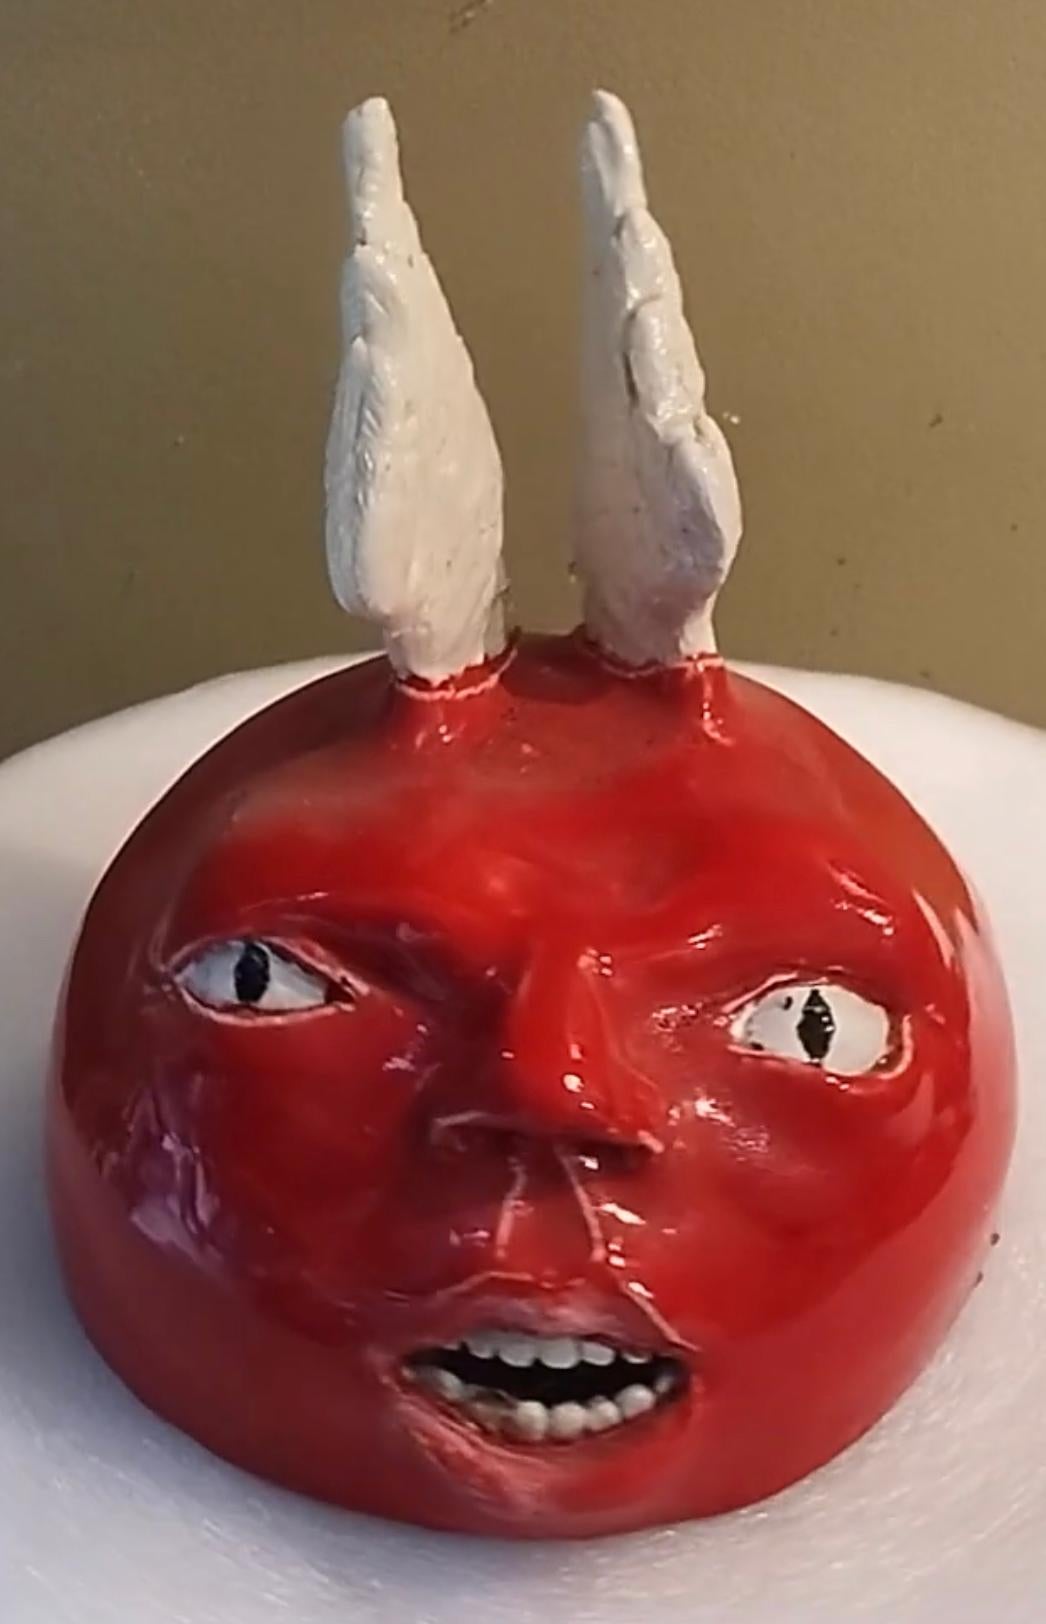 Artist: Jim Pallas (1941)
Title: Red devil (no ears)
Year: 2021
Medium: Glazed ceramic
Size: 8 x 7 x 7 inches
Condition: Excellent
Inscription: Signed and dated

JIM PALLAS (1941-) American painter, draughtsman, sculptor, and printmaker. An